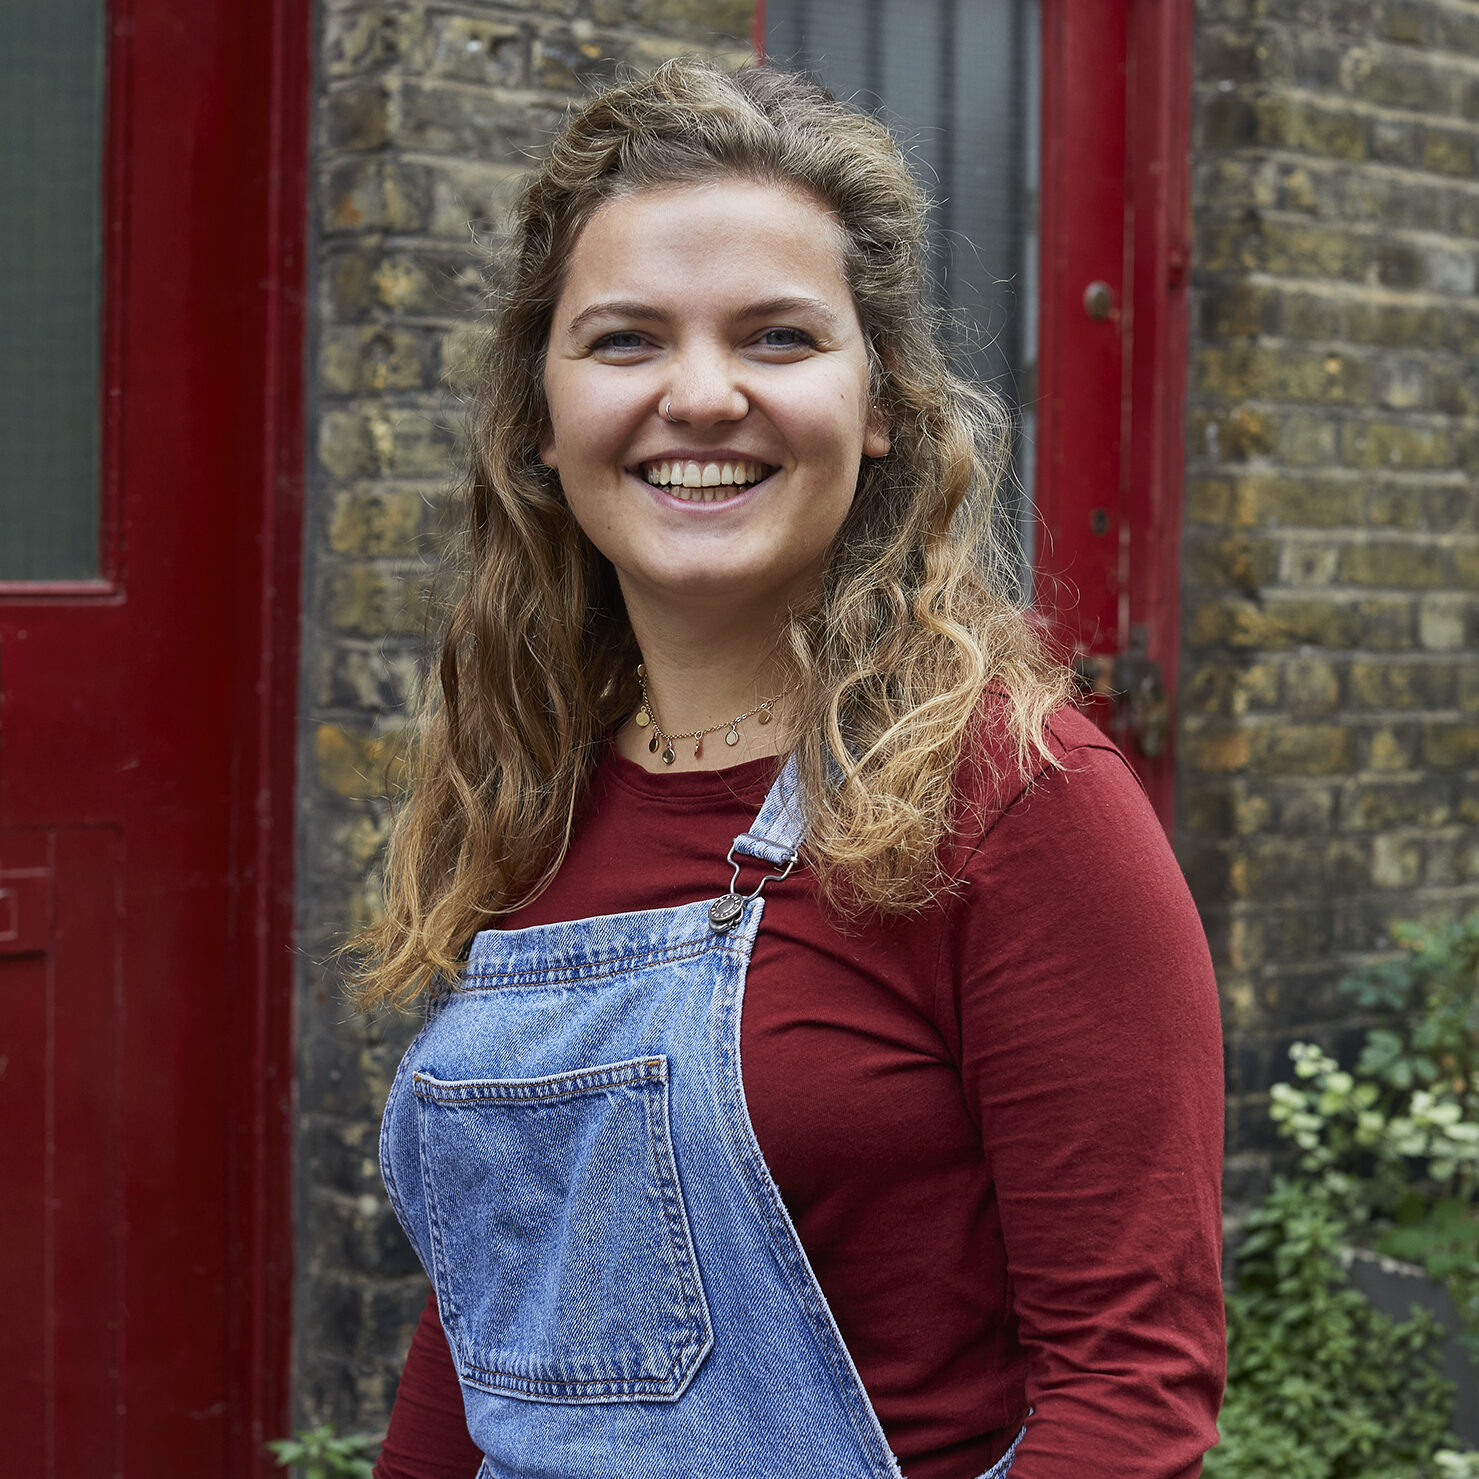 Cornish native Fliss Freeborn, now a Glasgow-based food writer, joins our Saturday Brunch Session panel. She's BBC R4's The Kitchen Cabinet's youngest panelist, winner of Fortnum and Mason's 2023 Cookery Writer Award, and author of "Do Yourself a Flavour." Catch her insightful take on thrifty cooking and culinary adventures.